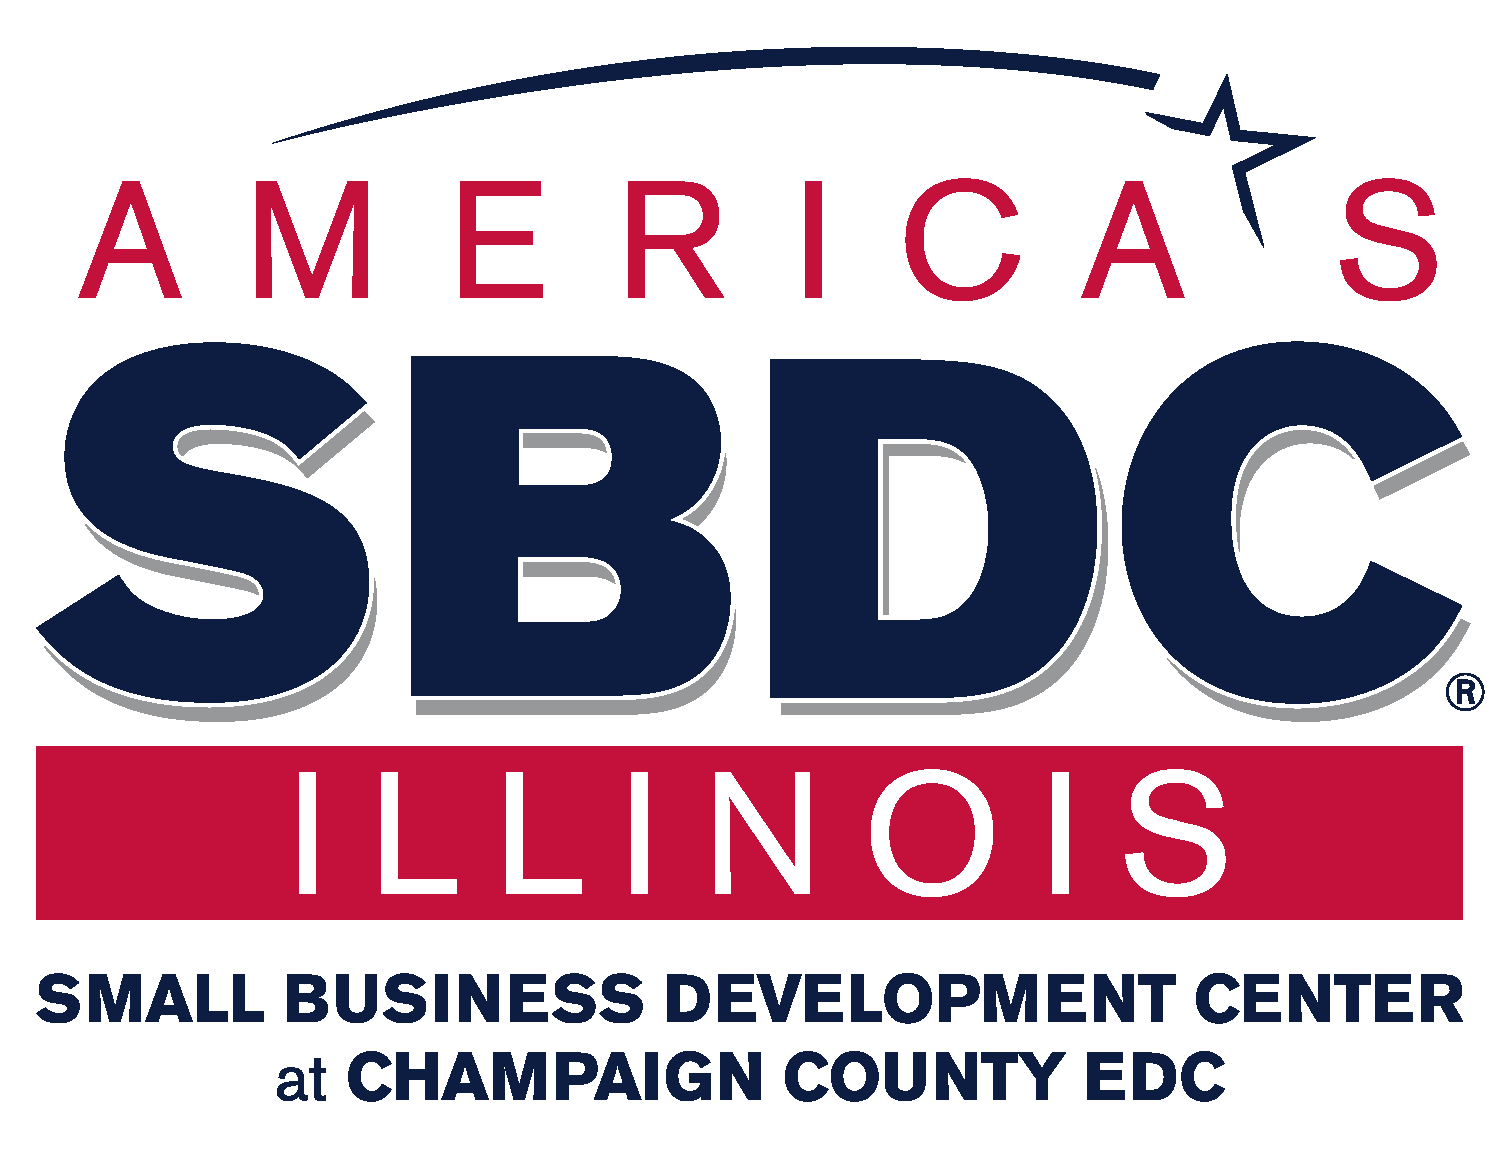 Logo for the Small Business Development Center at Champaign County EDC.